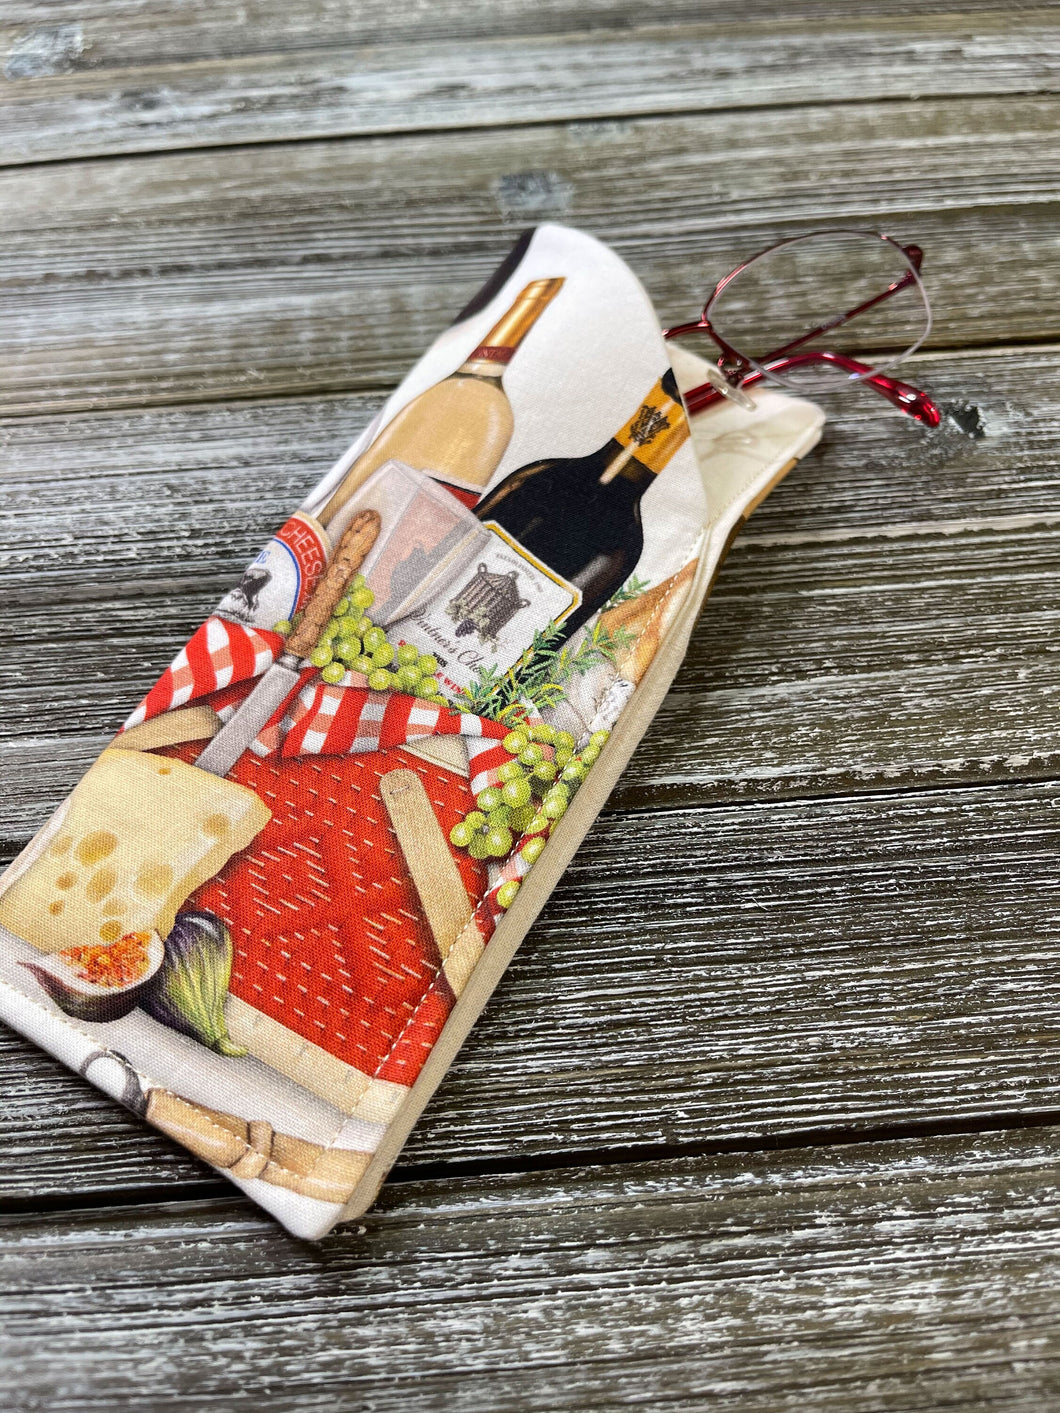 Eyeglass Case - Wine and Cheese Design - Great for Reading Glasses, Regular Glasses and Sunglasses